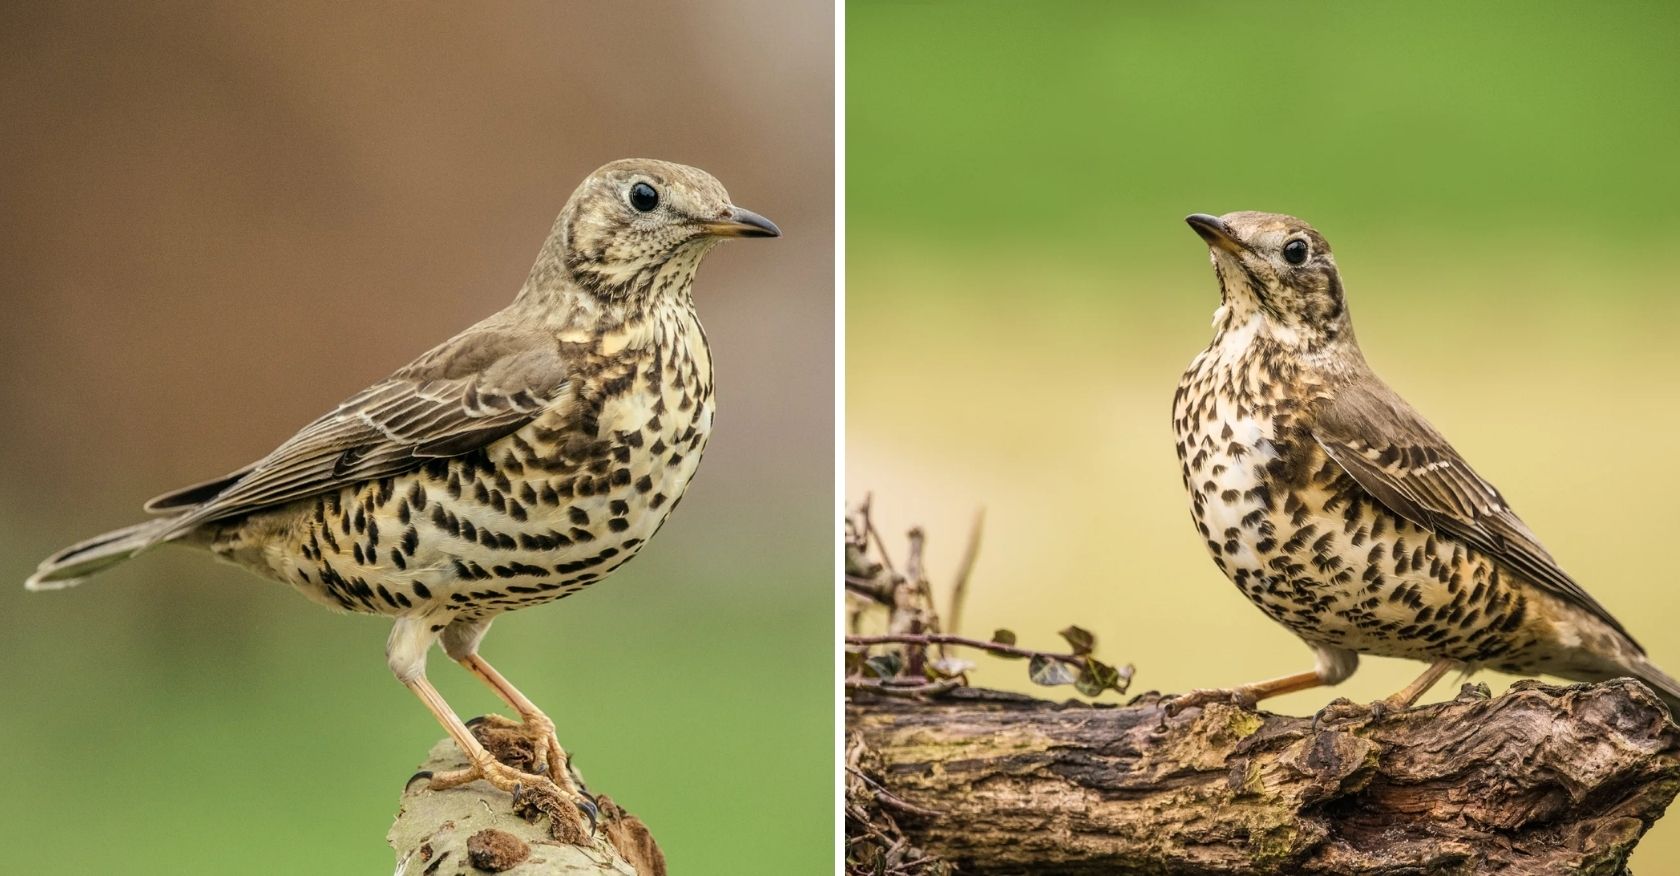 The Mistle Thrush is a handsome bird with a pale grey-brown plumage and a distinctive white underwing, and its loud and melodious song can be heard ringing through the winter air, making it a symbol of the season